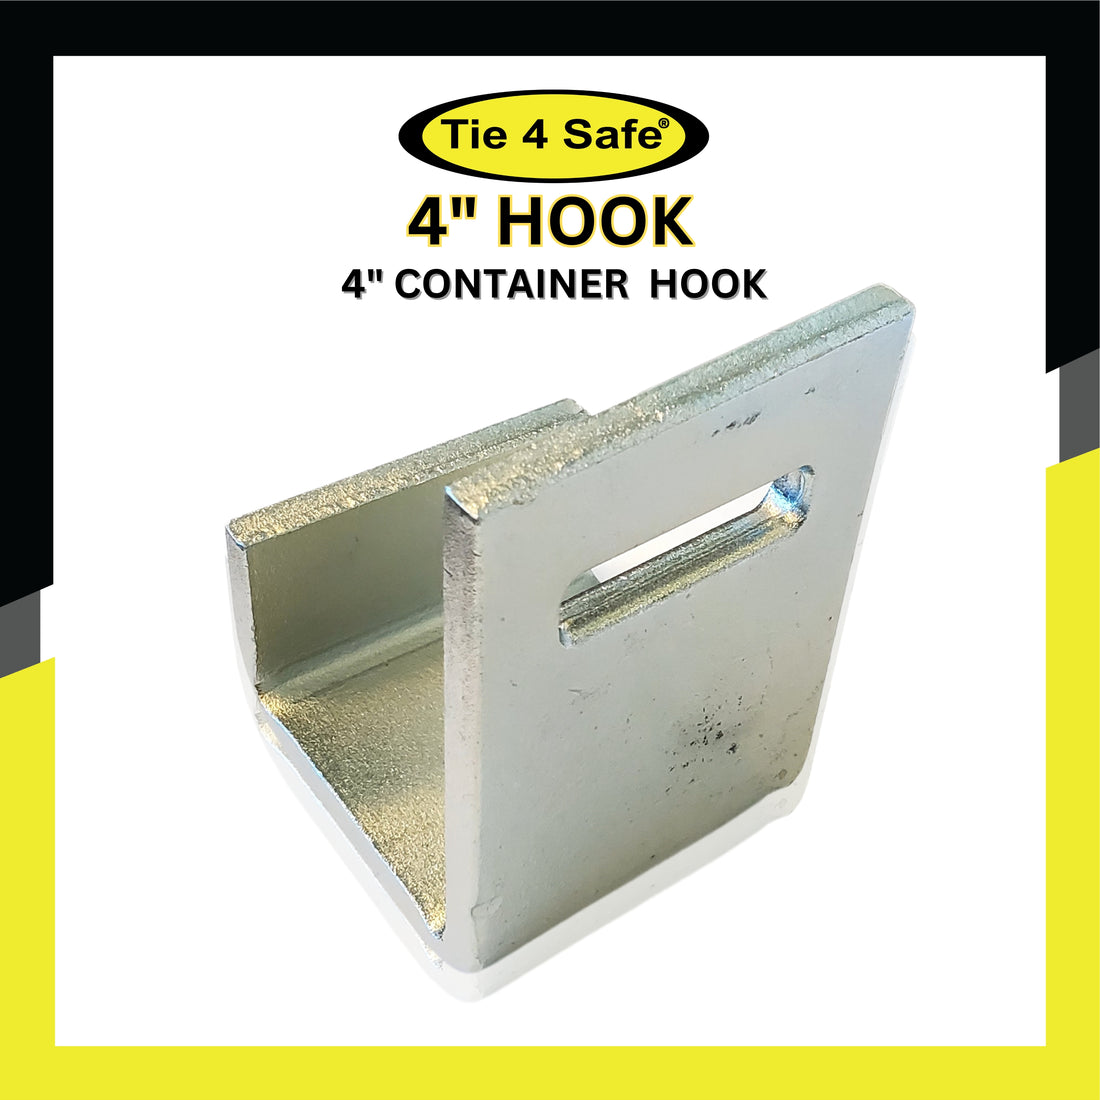 4" Container Hook